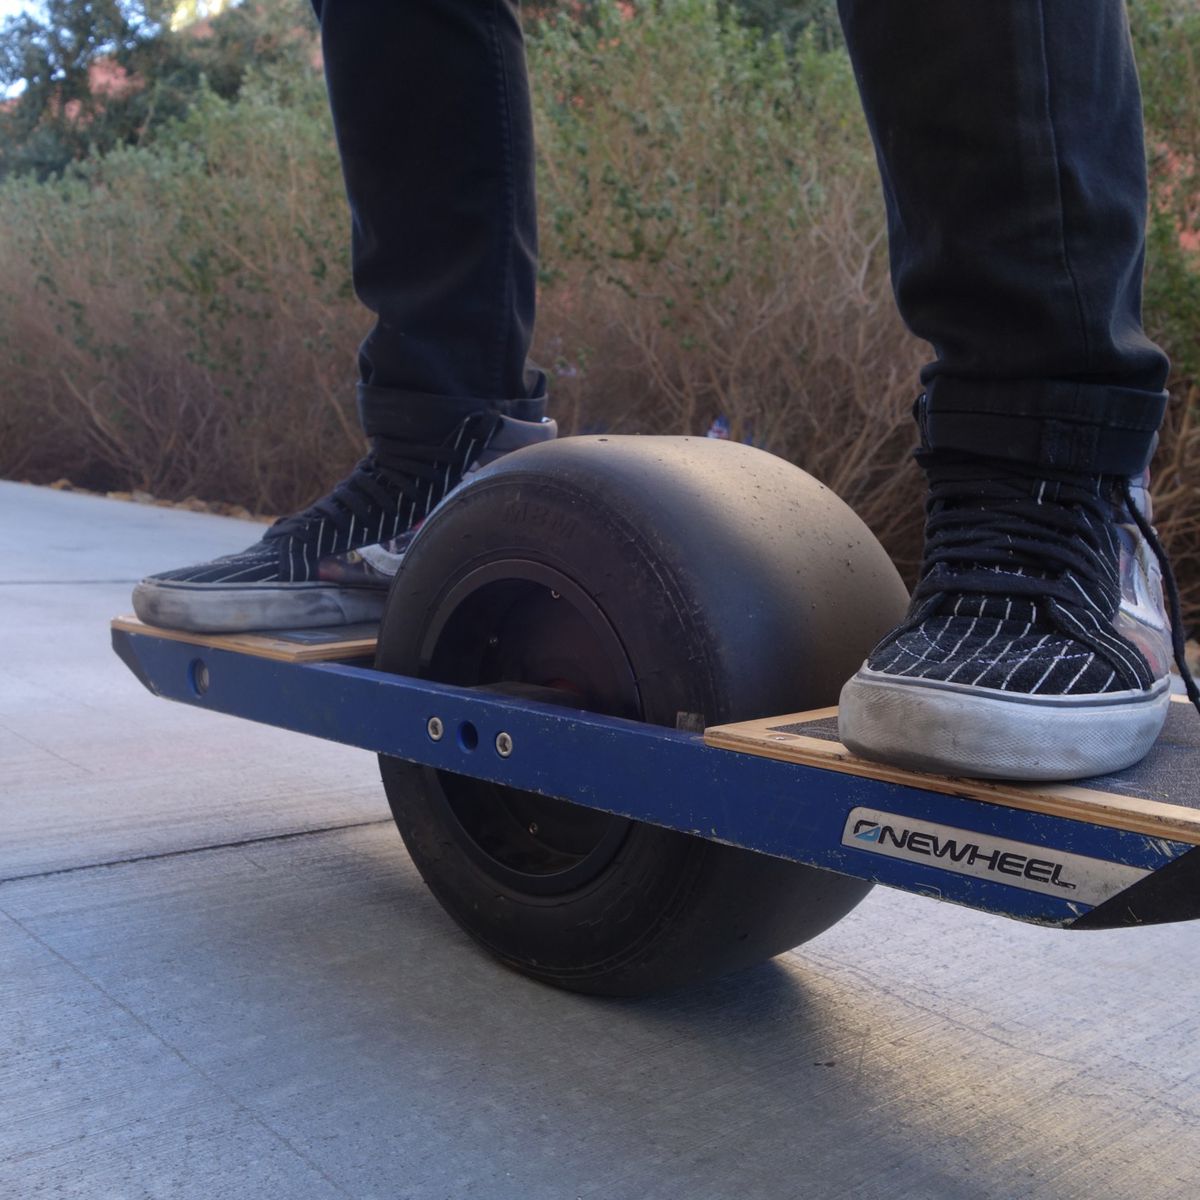 The Onewheel isn't a skateboard, but it's still fun as hell - The Verge